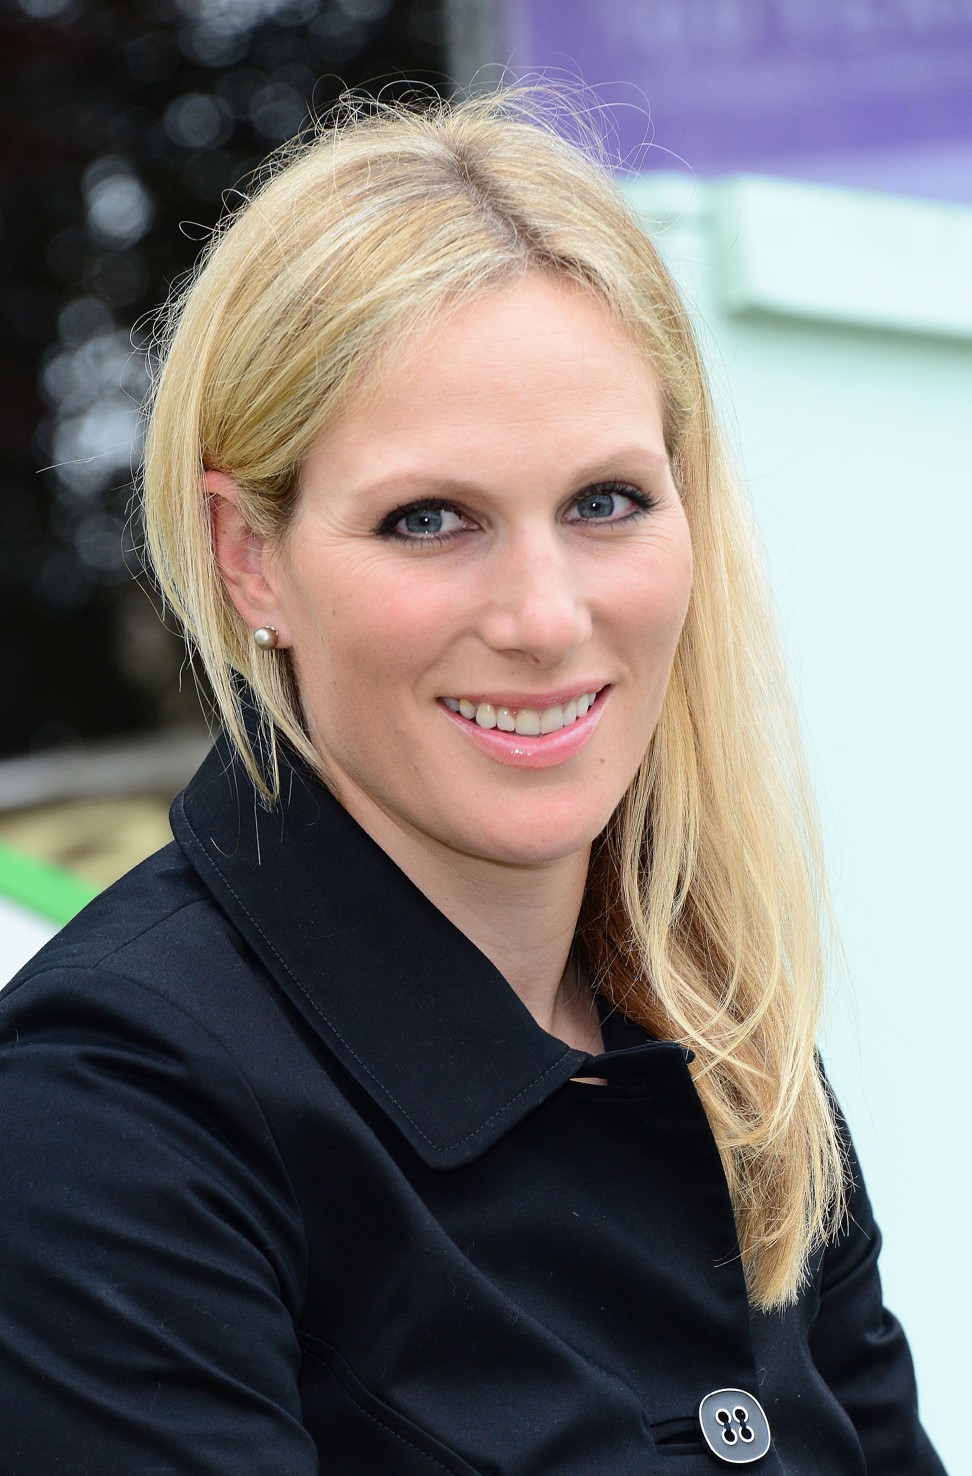 Zara Phillips is seen at the RHS Chelsea Flower Show in London, in 2013. Photo: Invision/AP